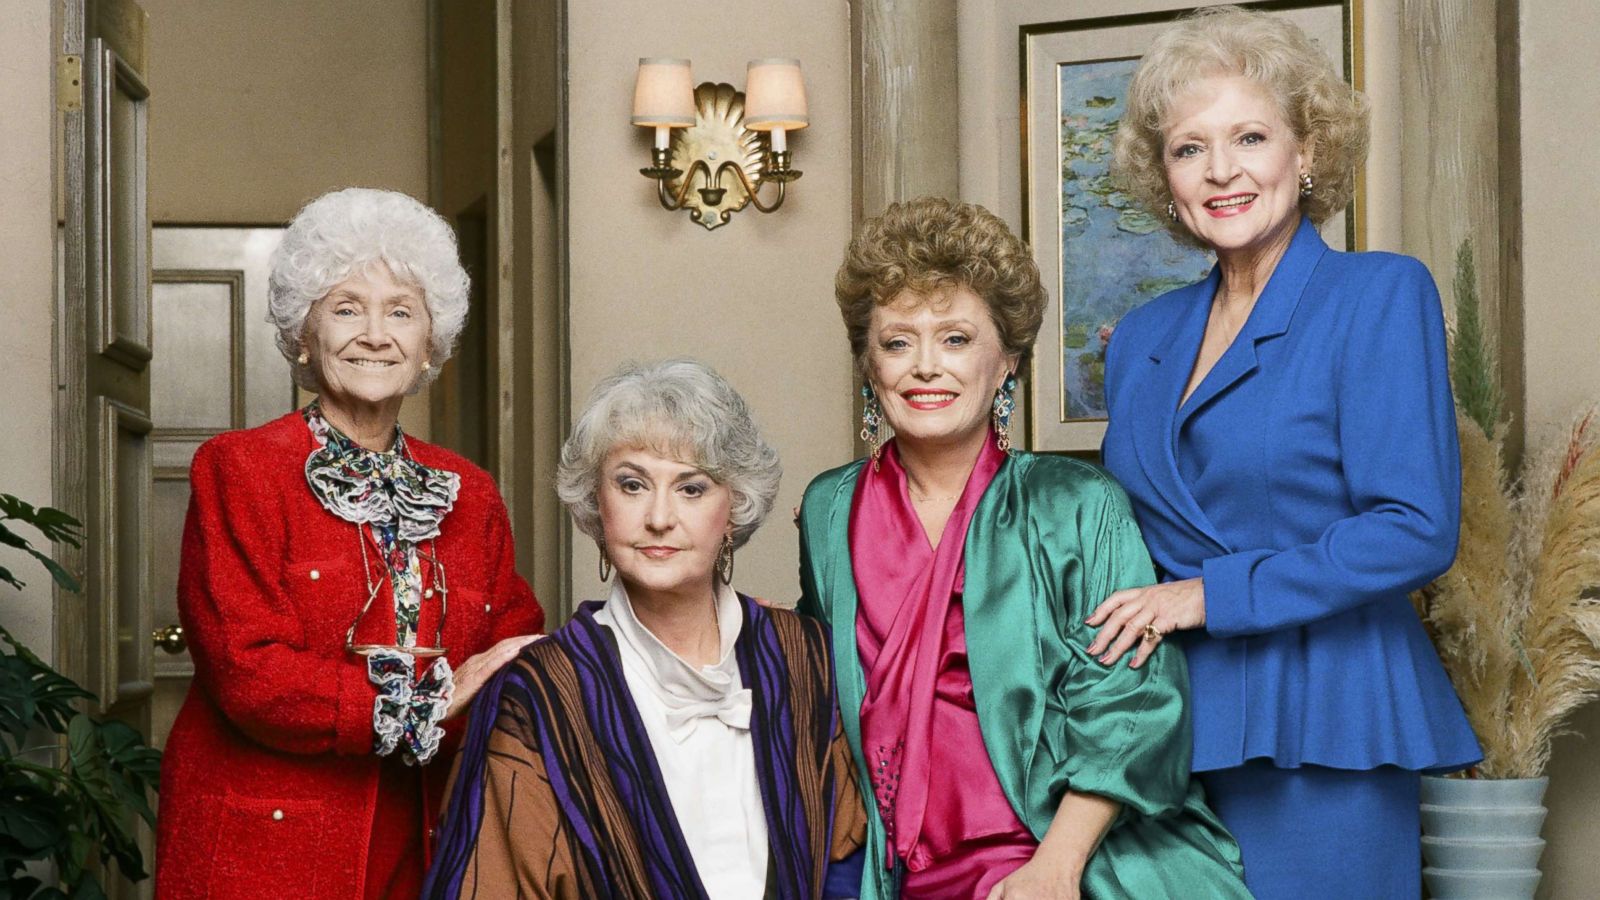 The Golden Girls - Where to Watch and Stream - TV Guide